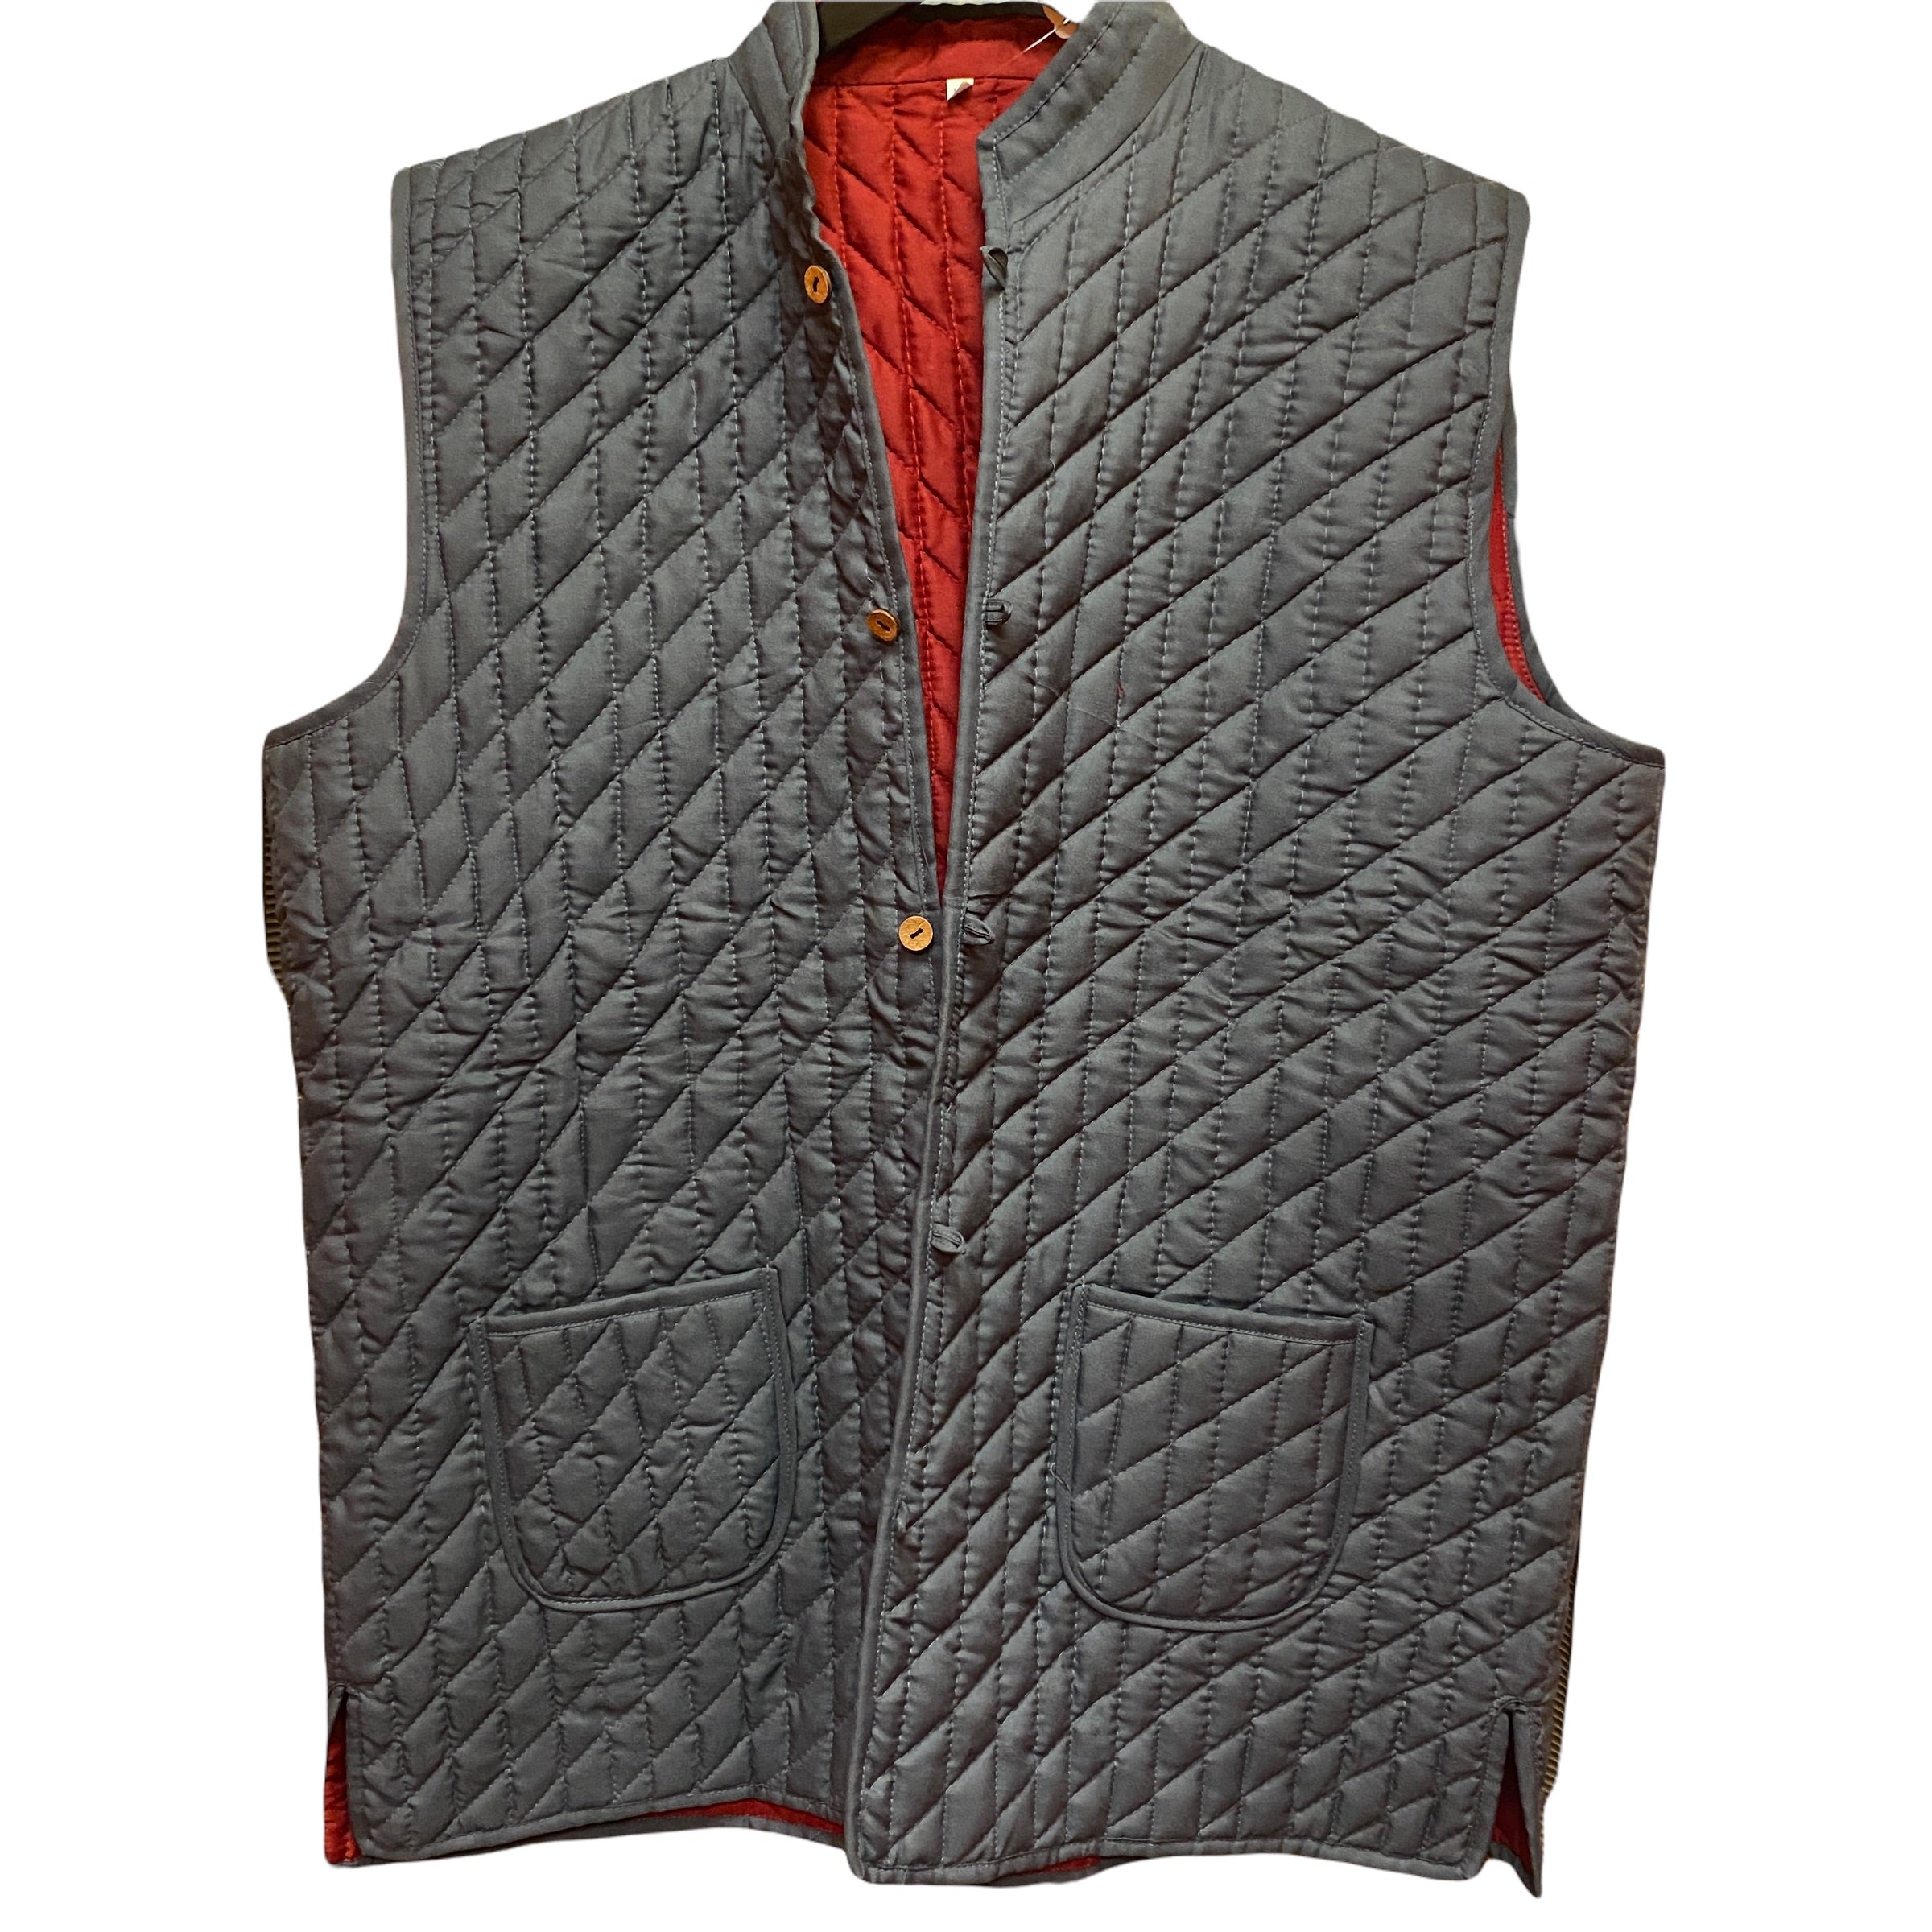 Mens Reversible Quilted Vests-Solid Colors - Vintage India NYC